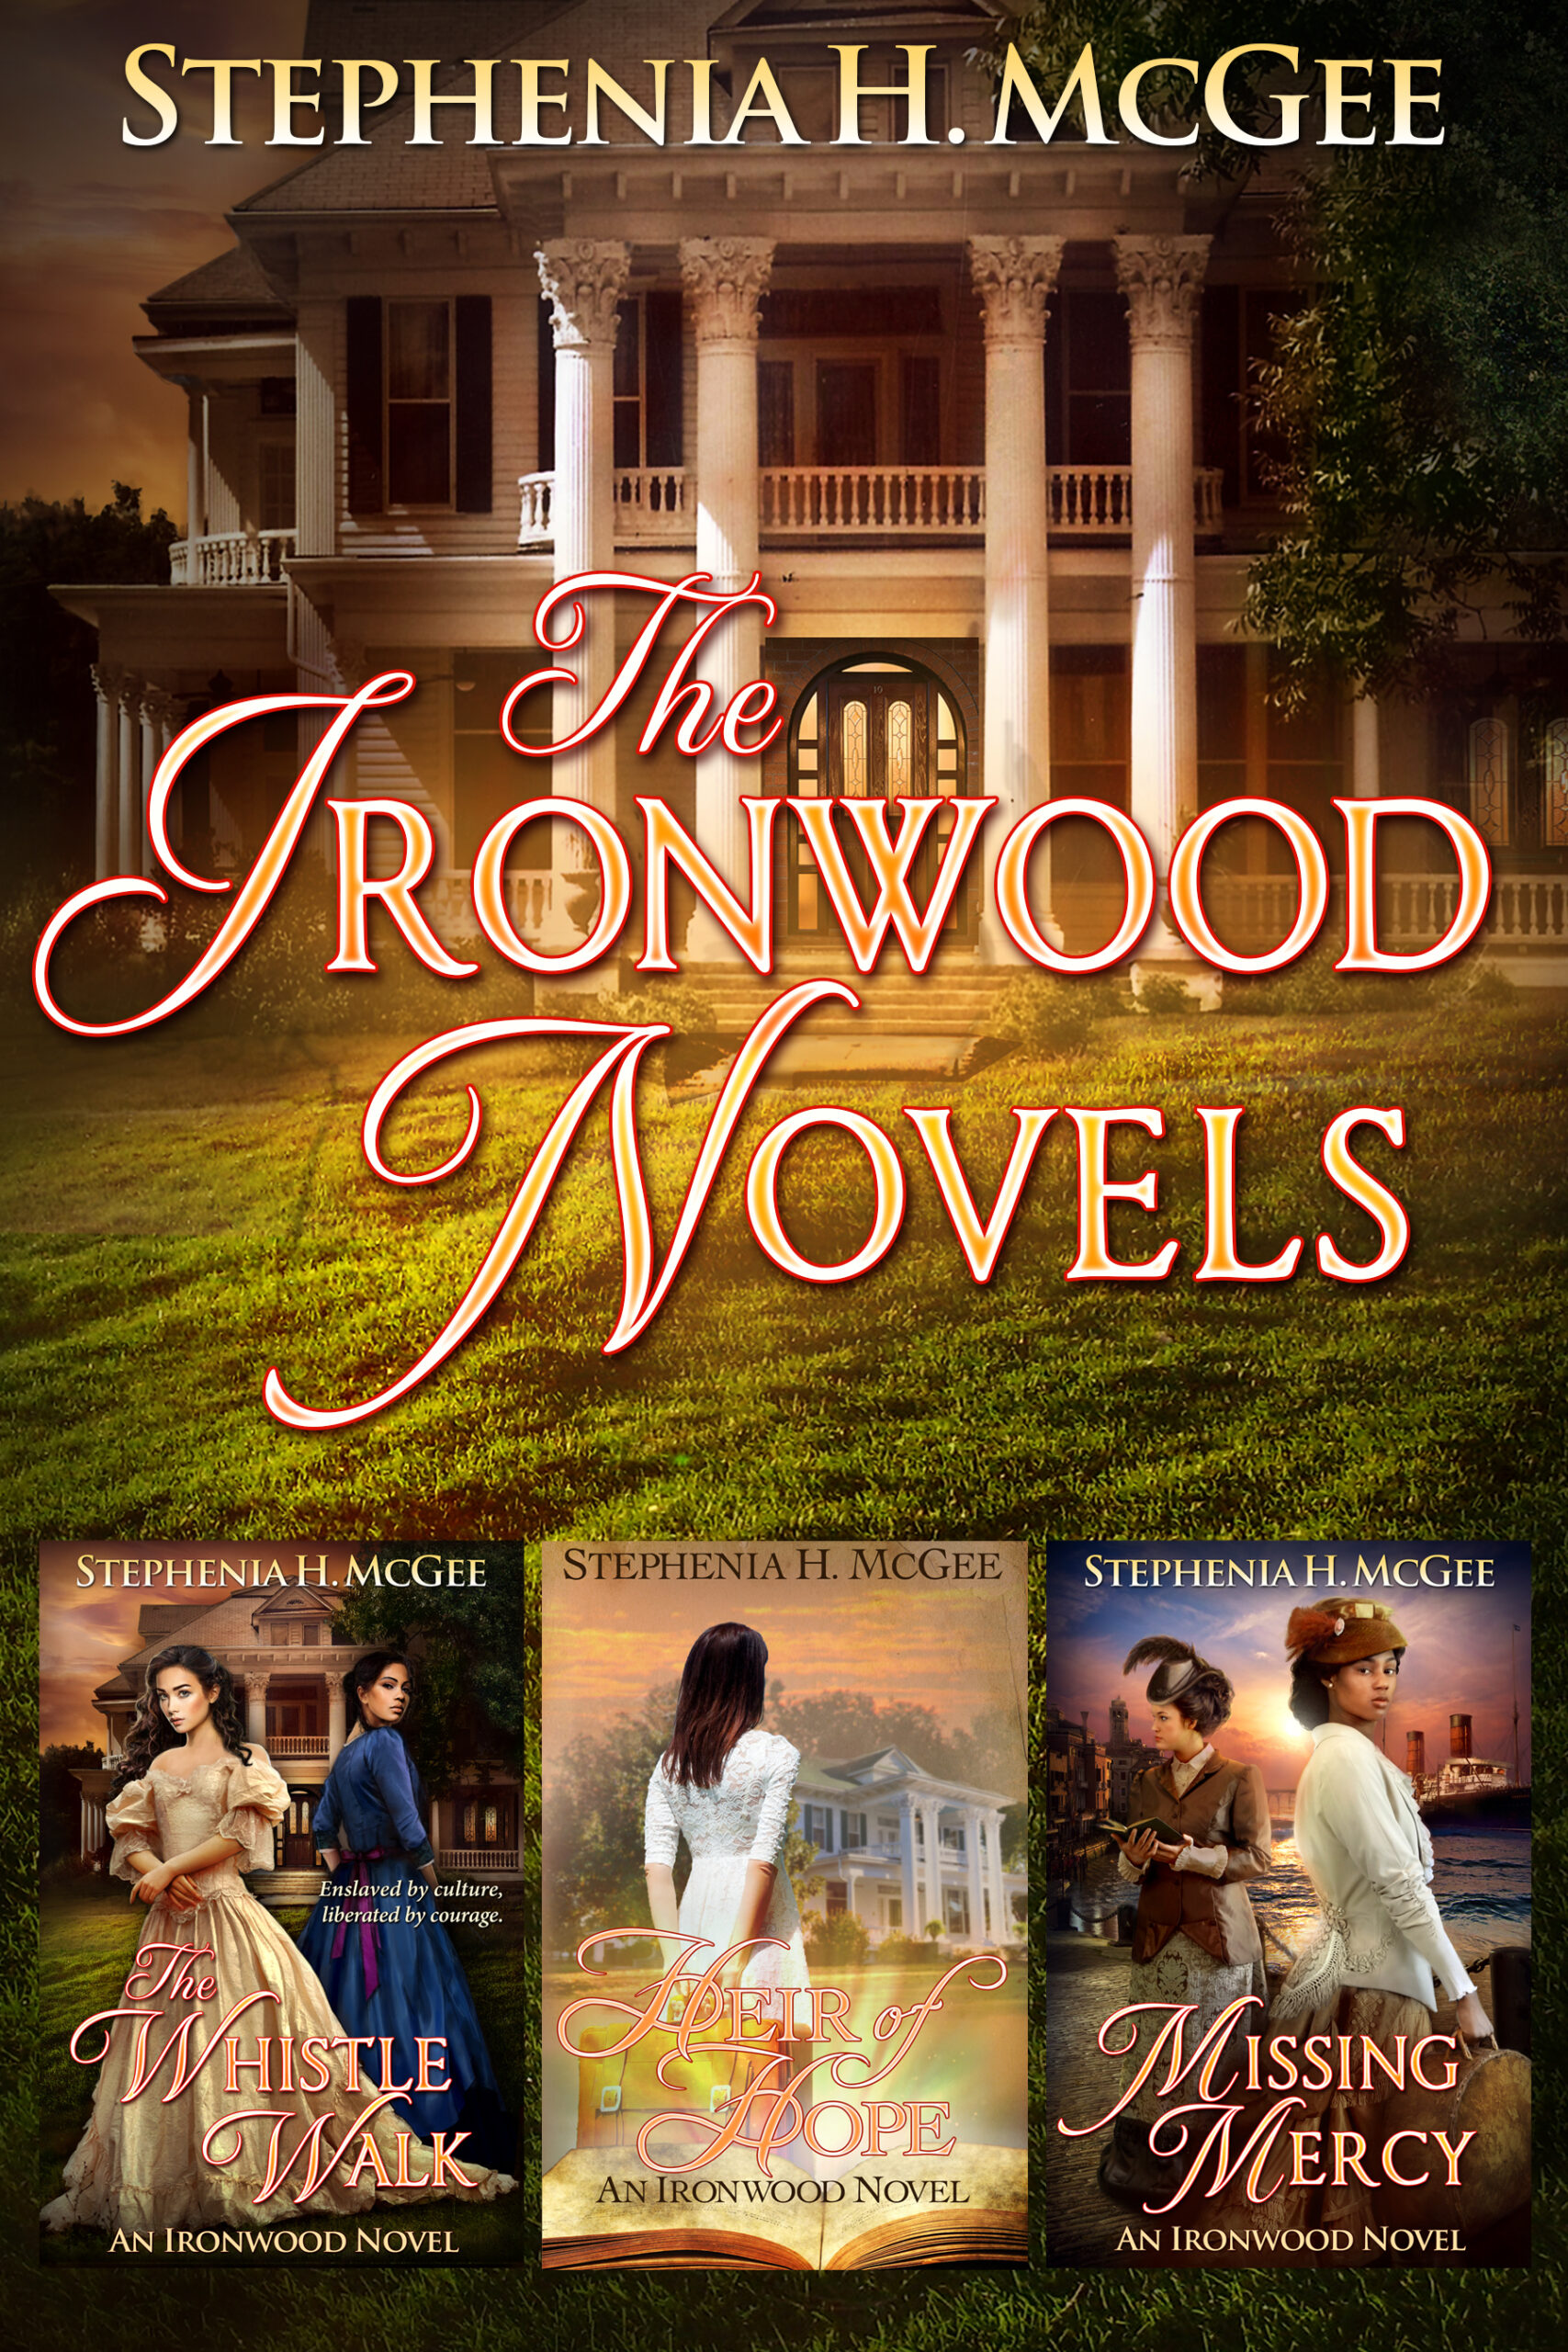 Featured image for “Ironwood Plantation Family Saga<br><span style="font-size:50%;">(eBook or Print)</span>”